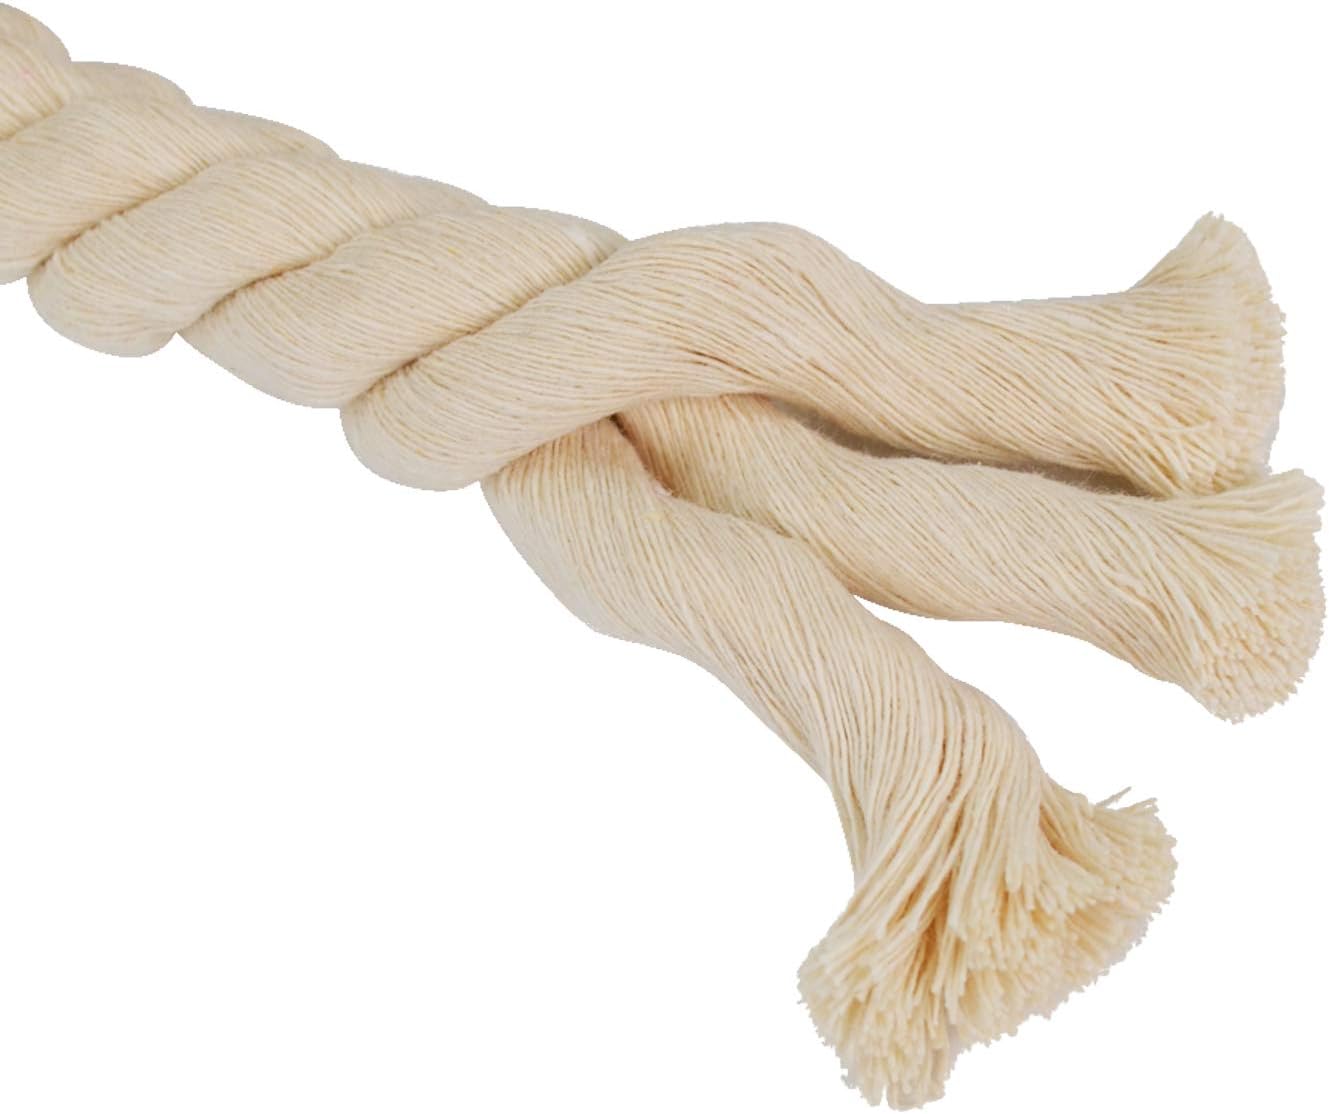 VEIZEDD 100% Natural Cotton Rope (3/4 Inch x 50 Feet) Strong Soft Twisted Rope for DIY Crafts Gardening Hammock Home Decorating,Wedding